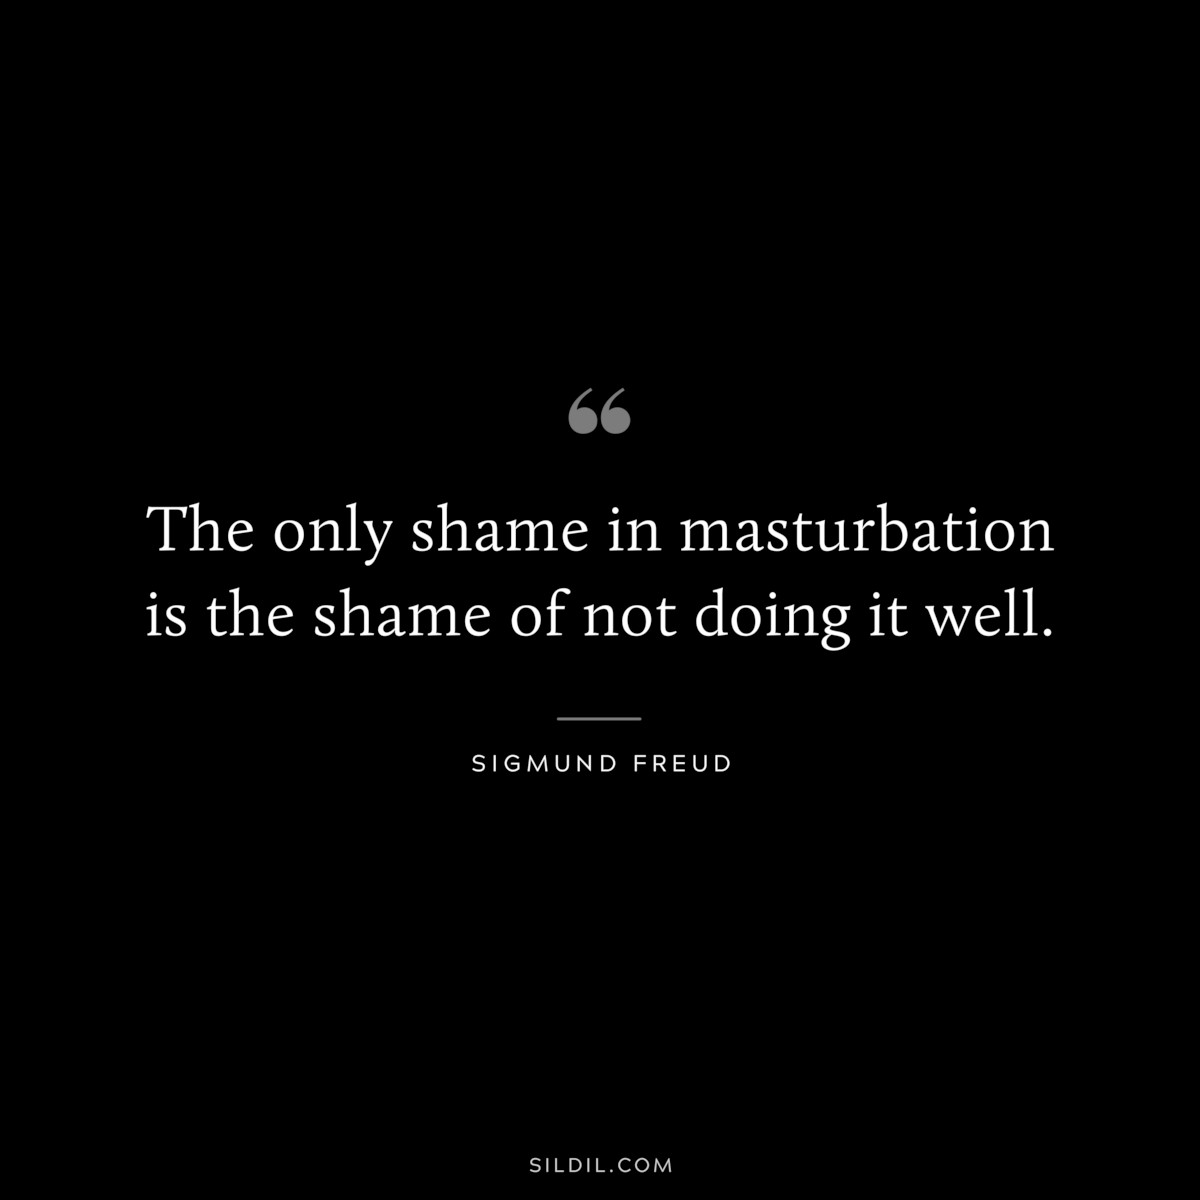 The only shame in masturbation is the shame of not doing it well. ― Sigmund Frued